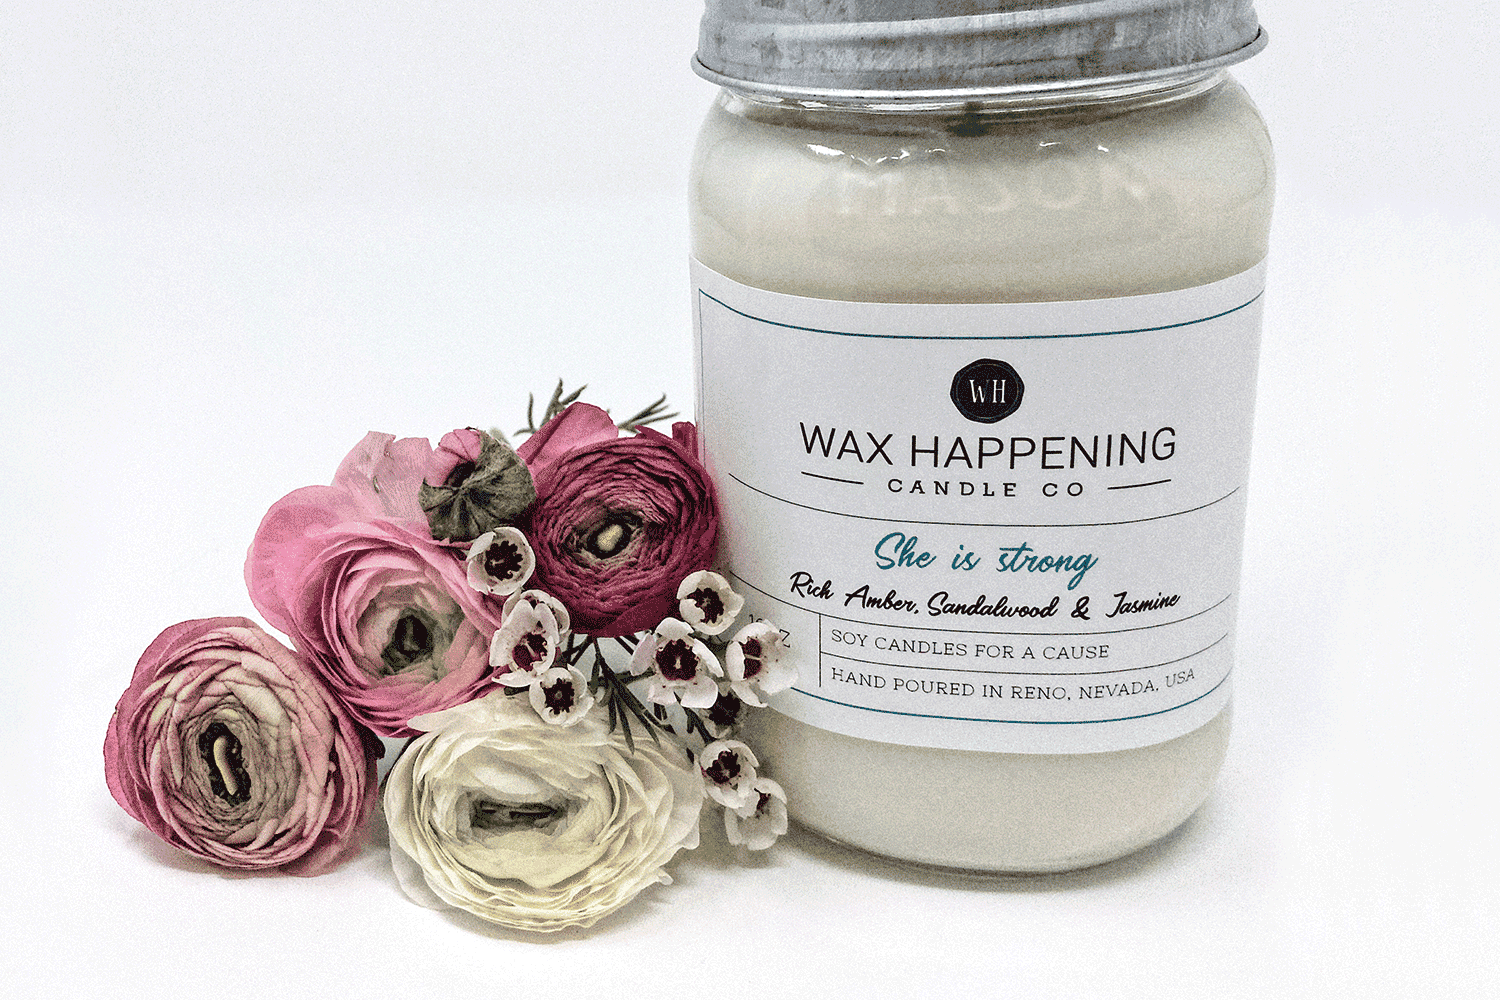 Wax Happening Candle Label